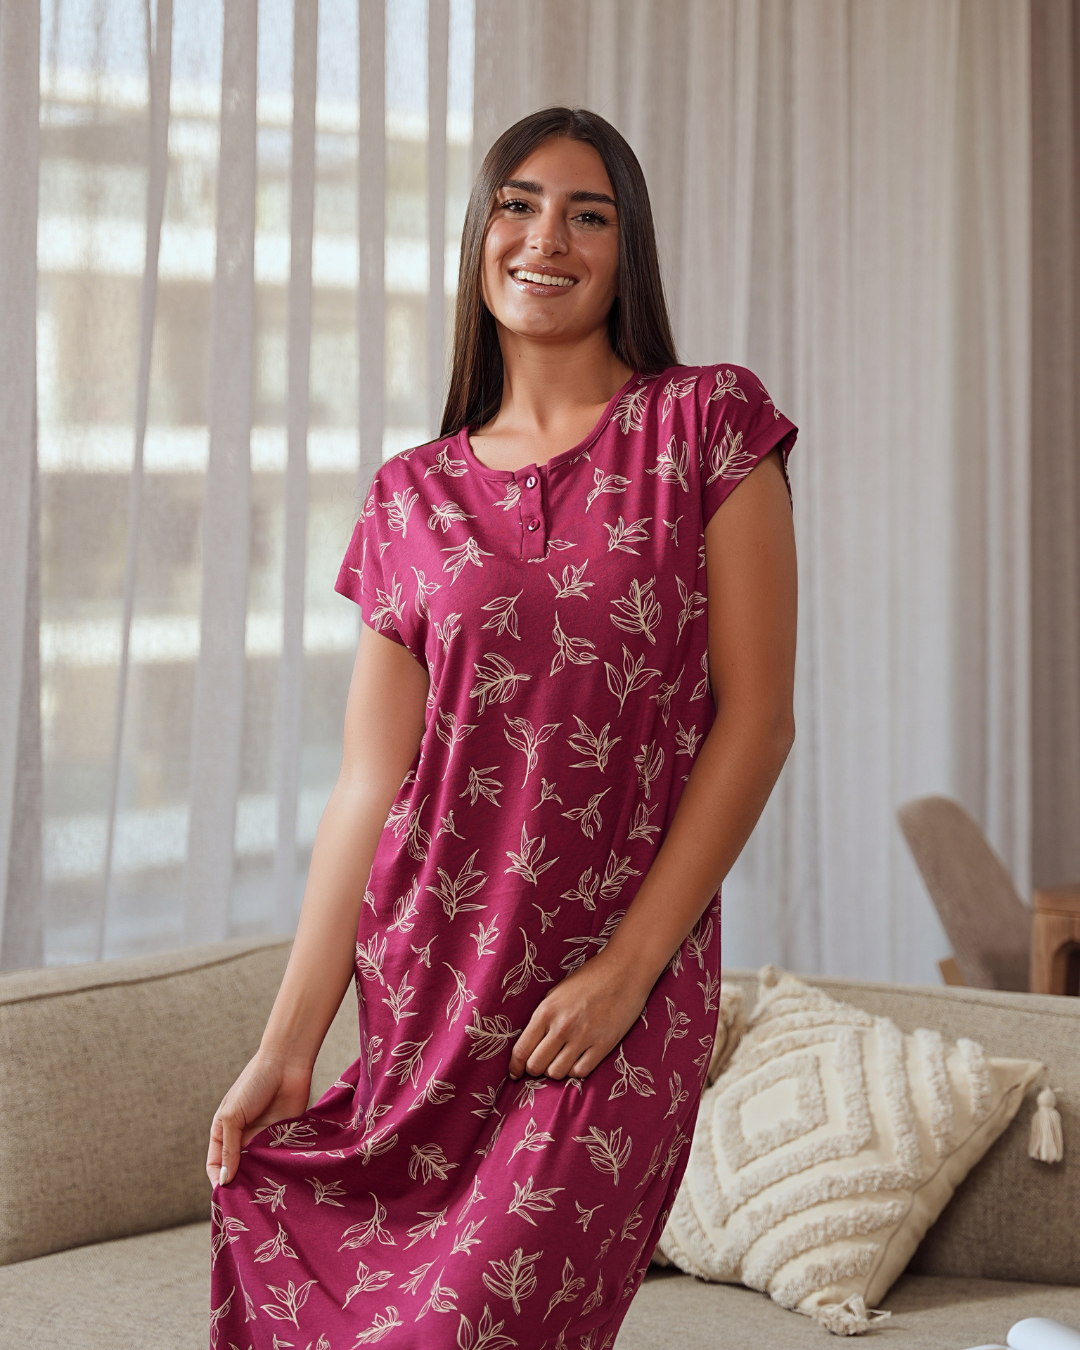 Women's shirt with half sleeves printed with leaves